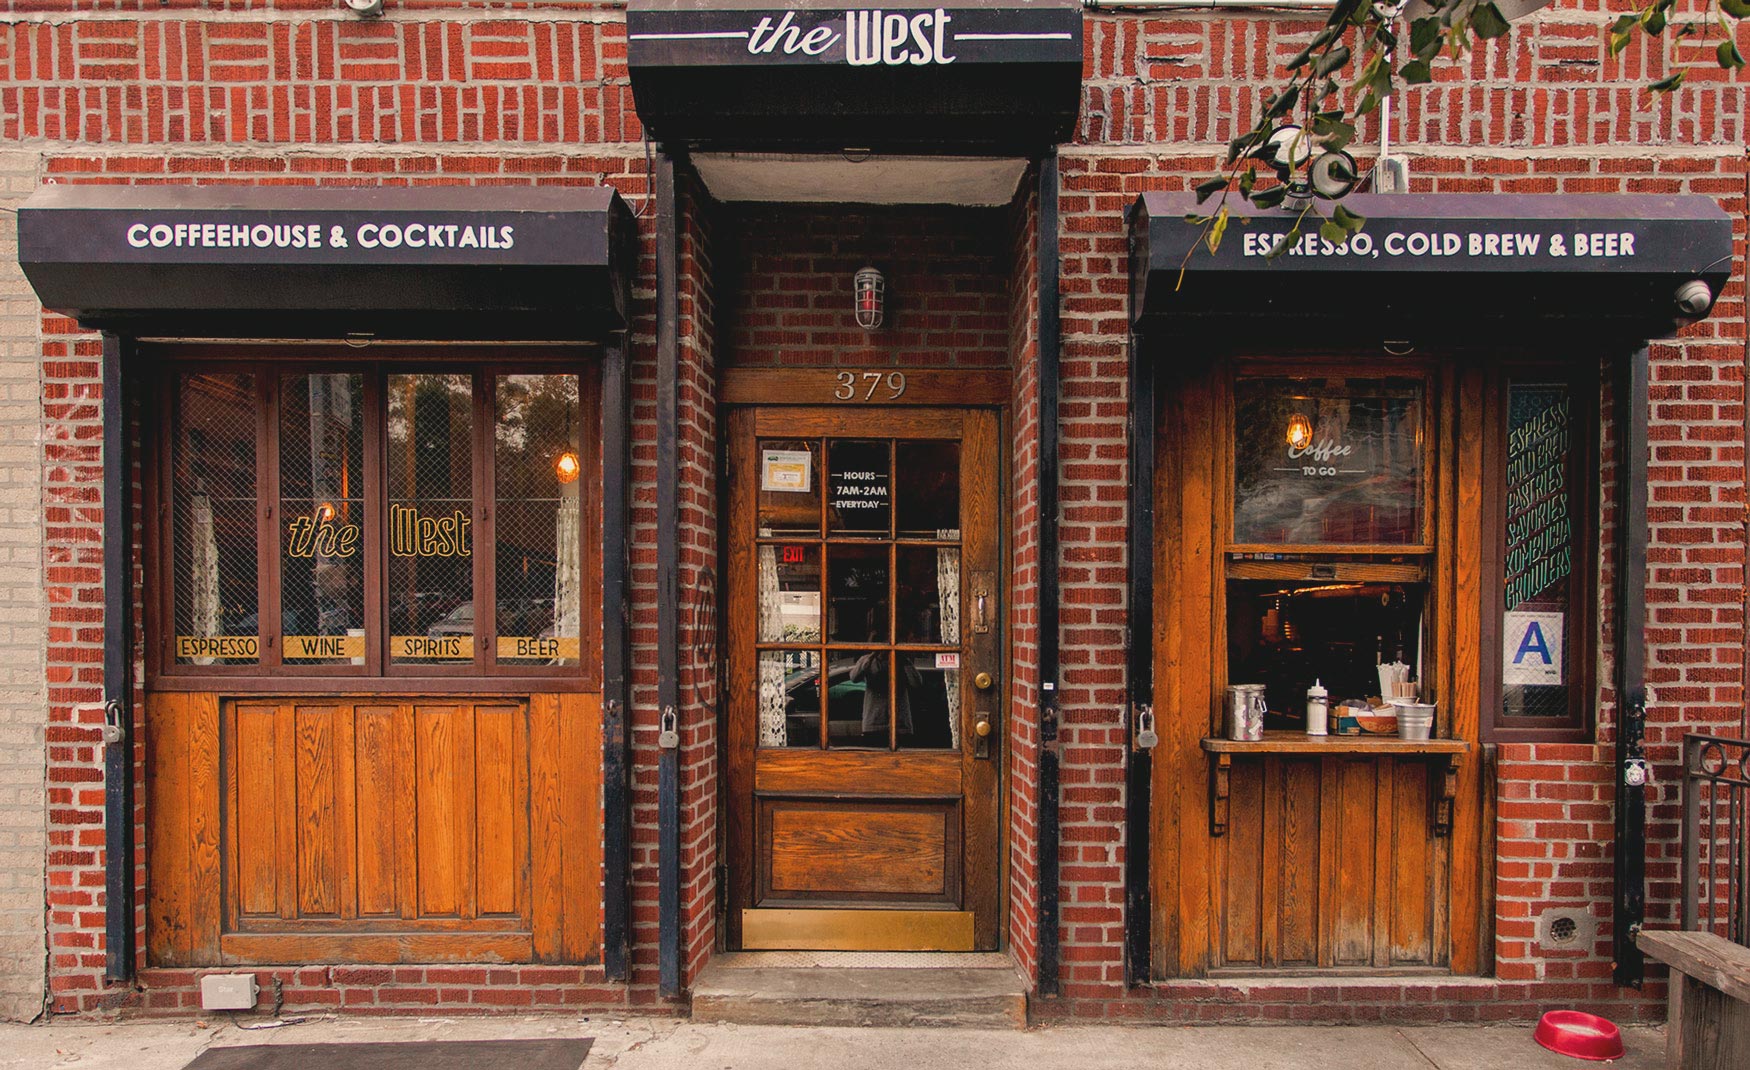 the West coffeehouse and bar